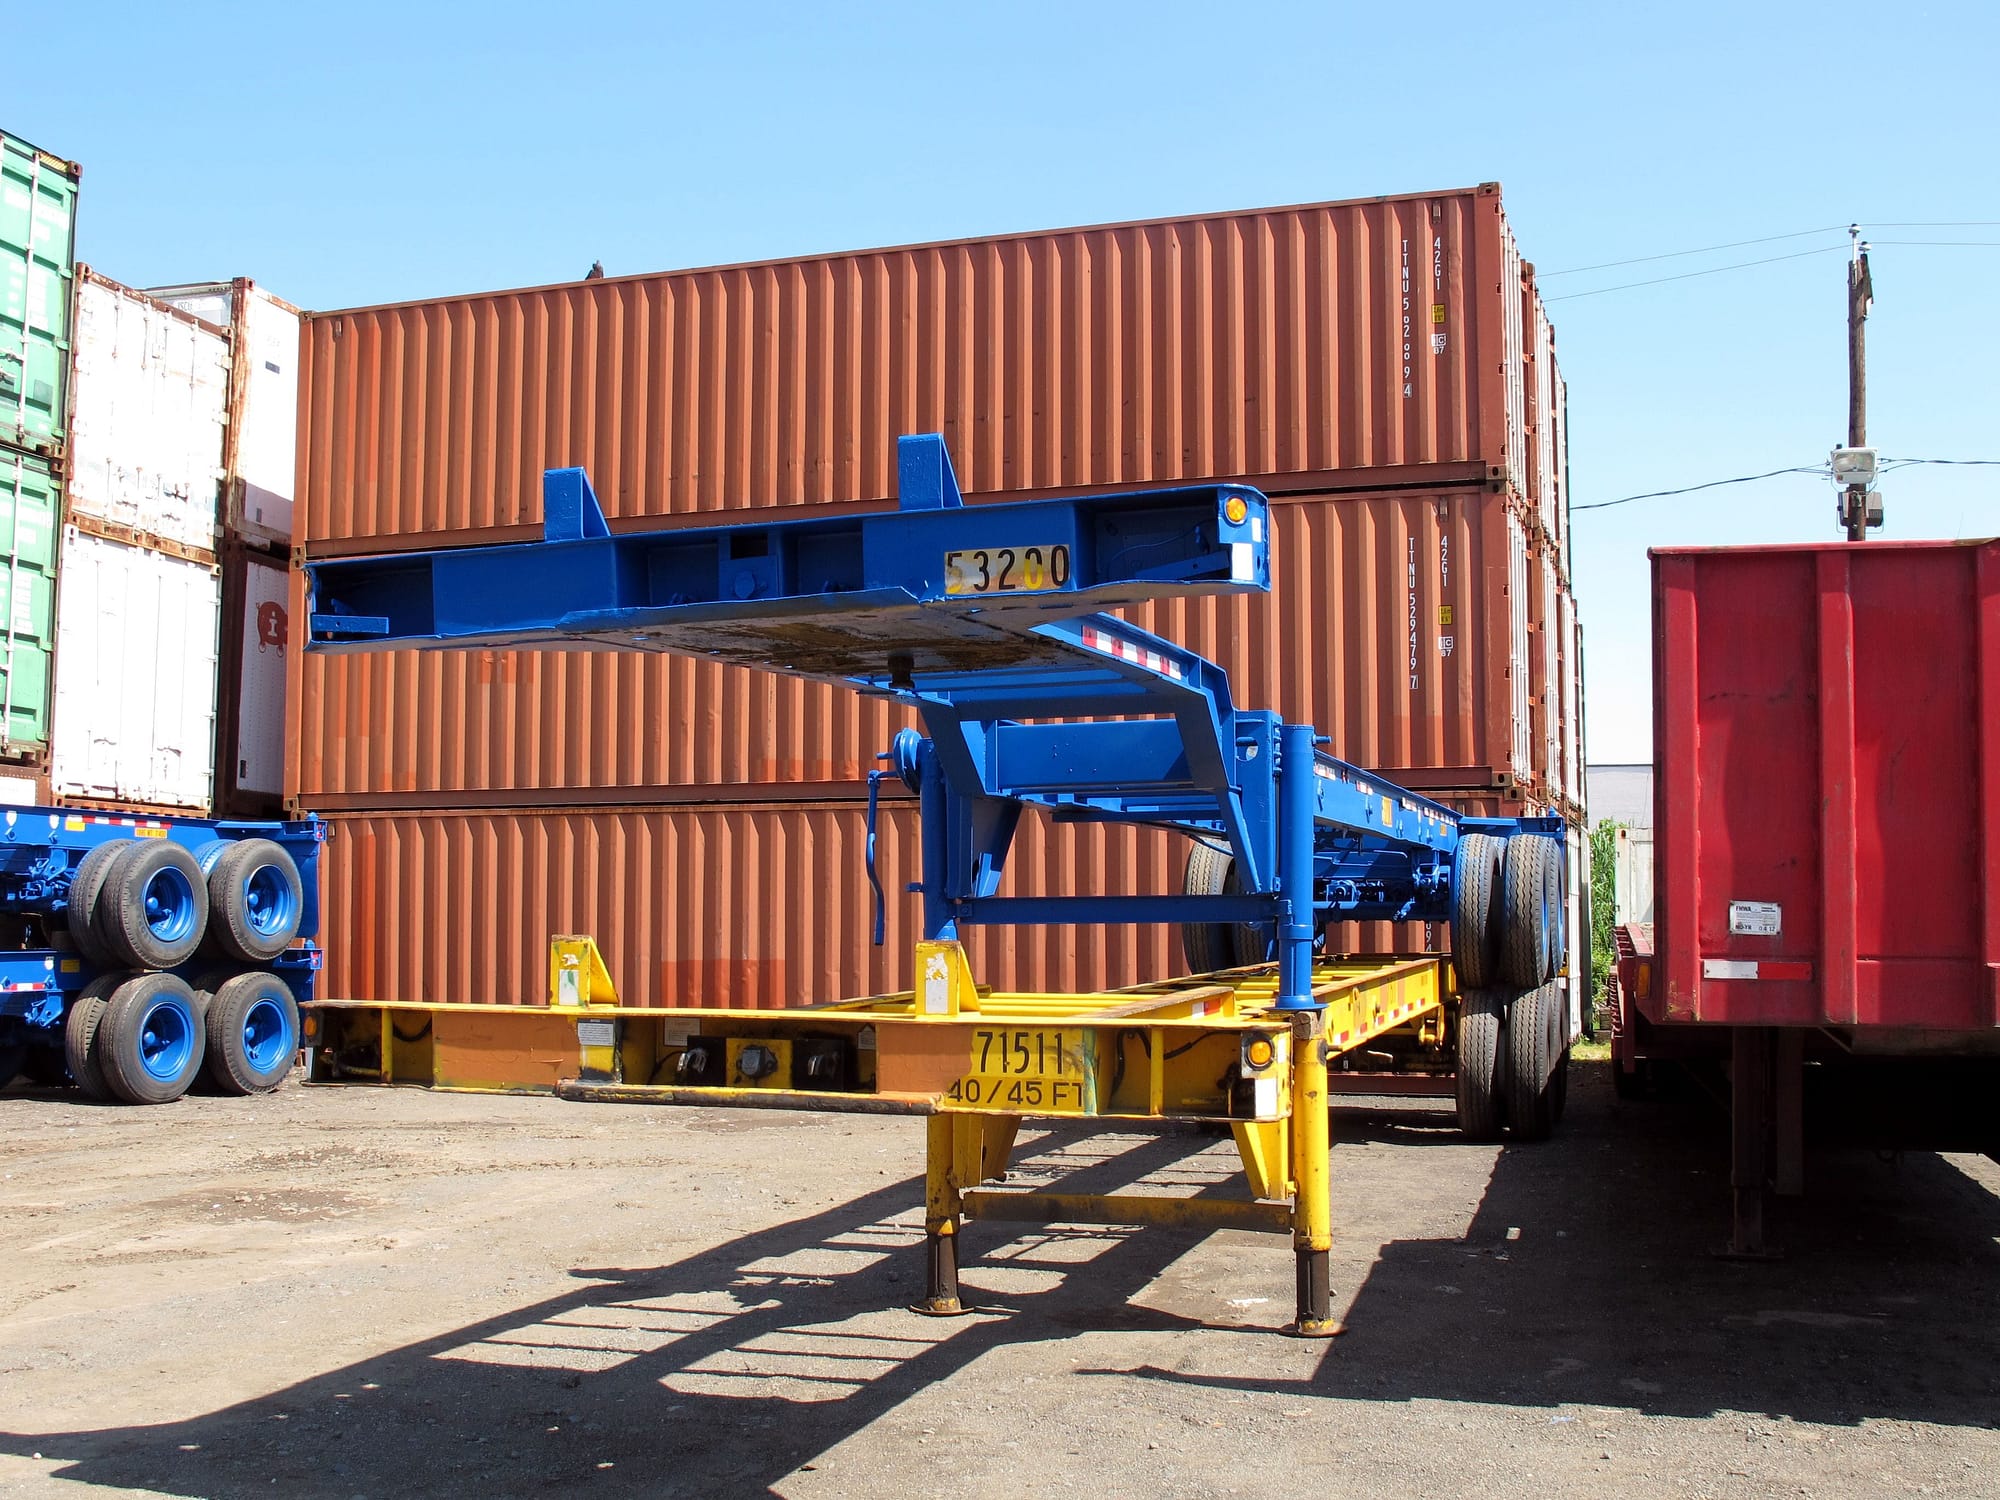 TRS Containers sells rents repairs and registers 40 foot - 45 foot long extendable chassis